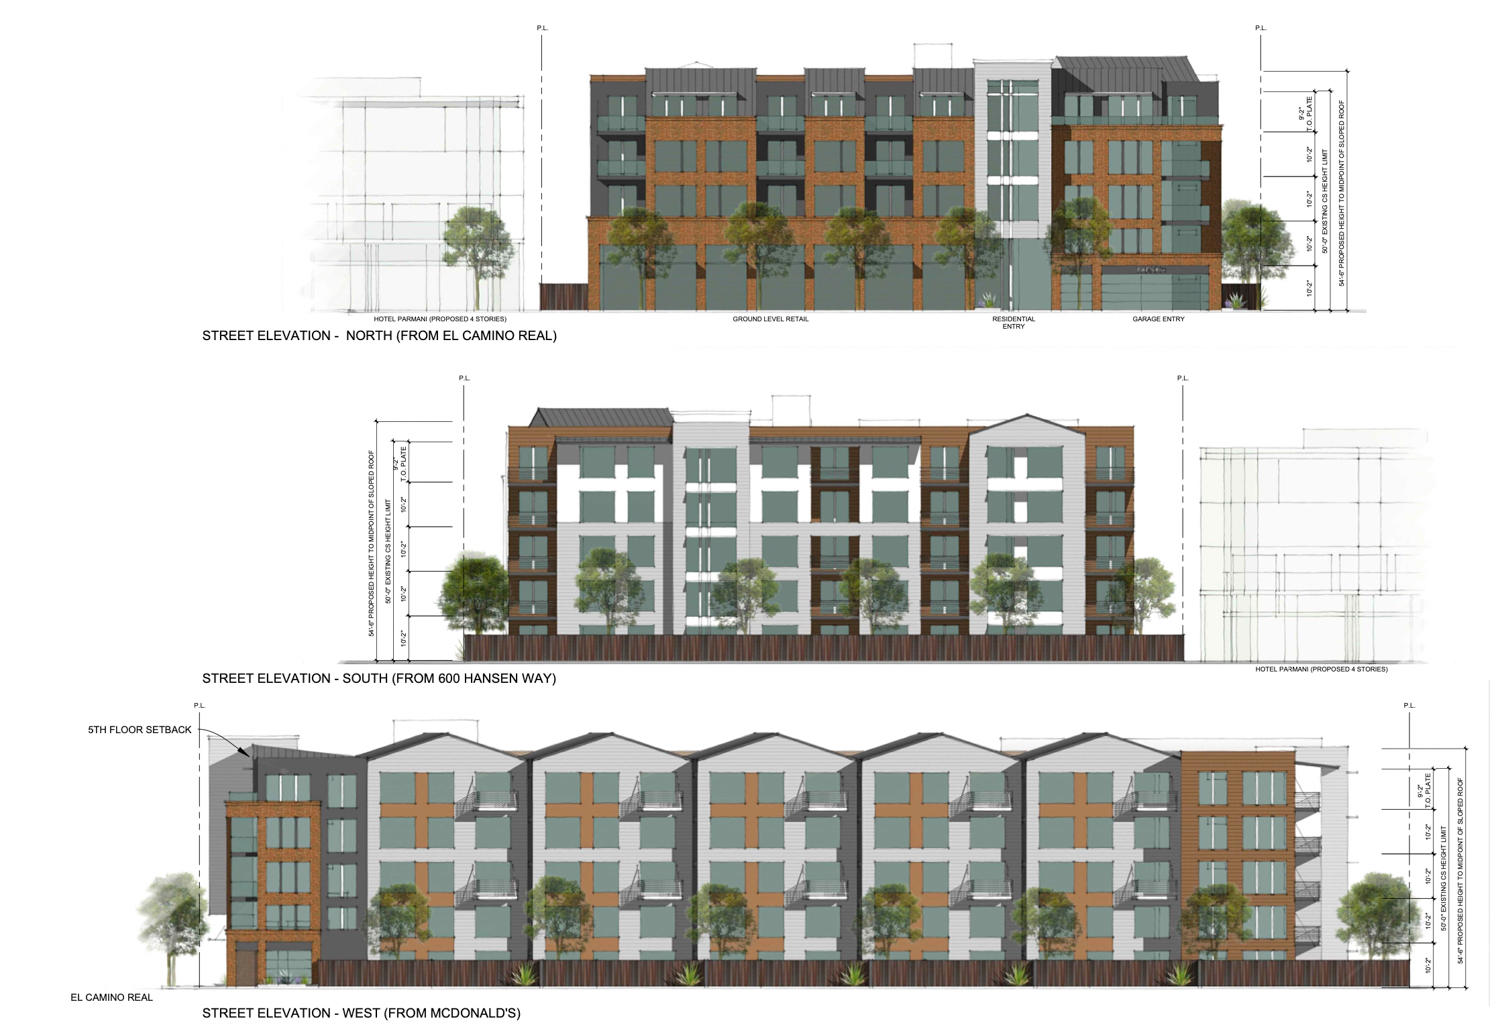 3150 El Camino Real facade elevations, rendering by Sherry Scott Architects